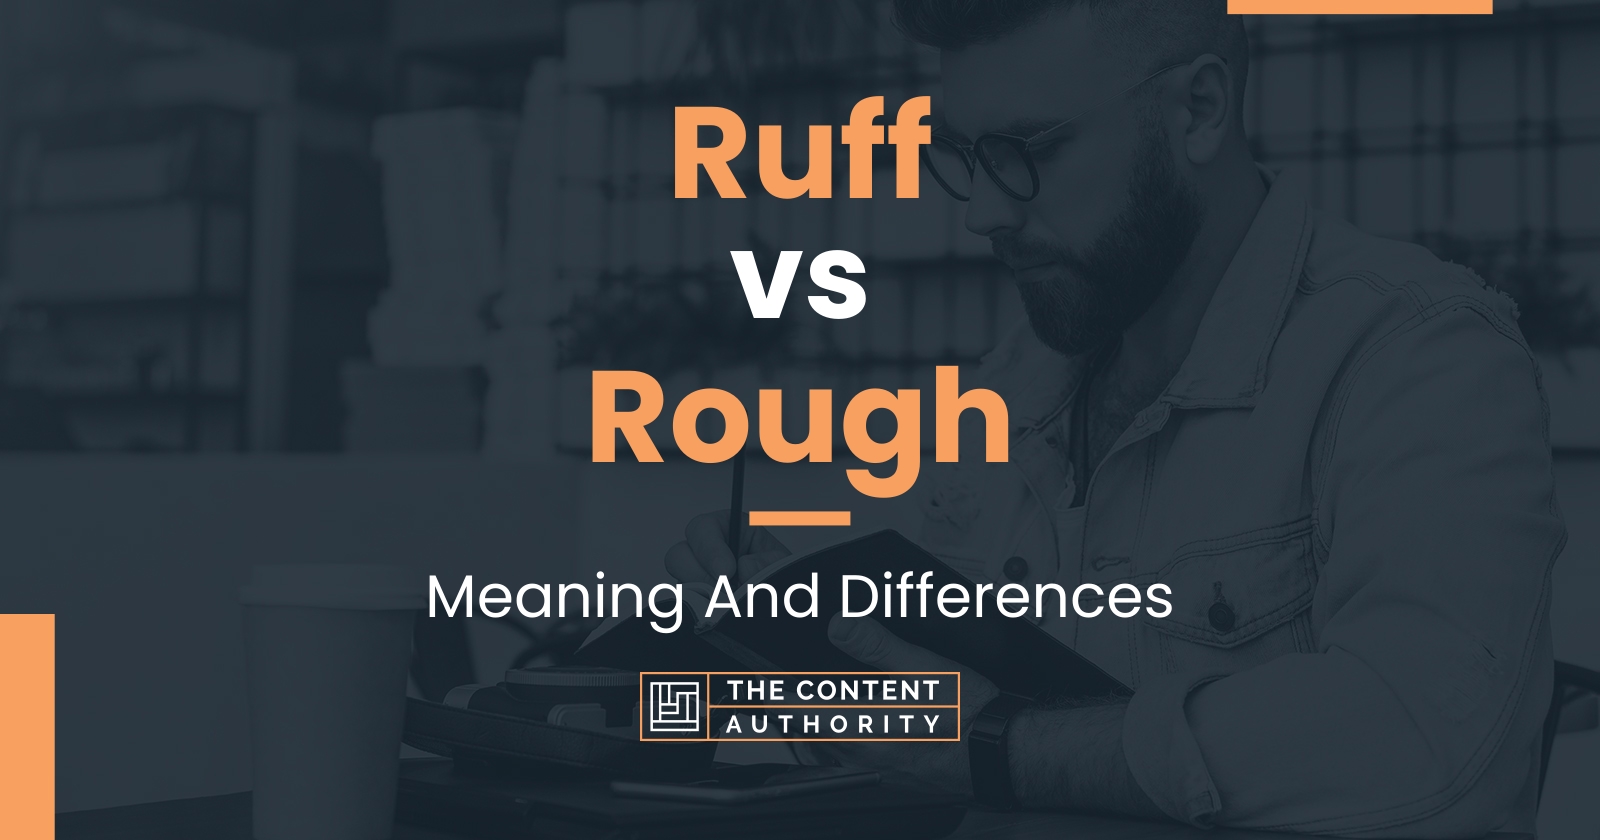 Ruff vs Rough Meaning And Differences